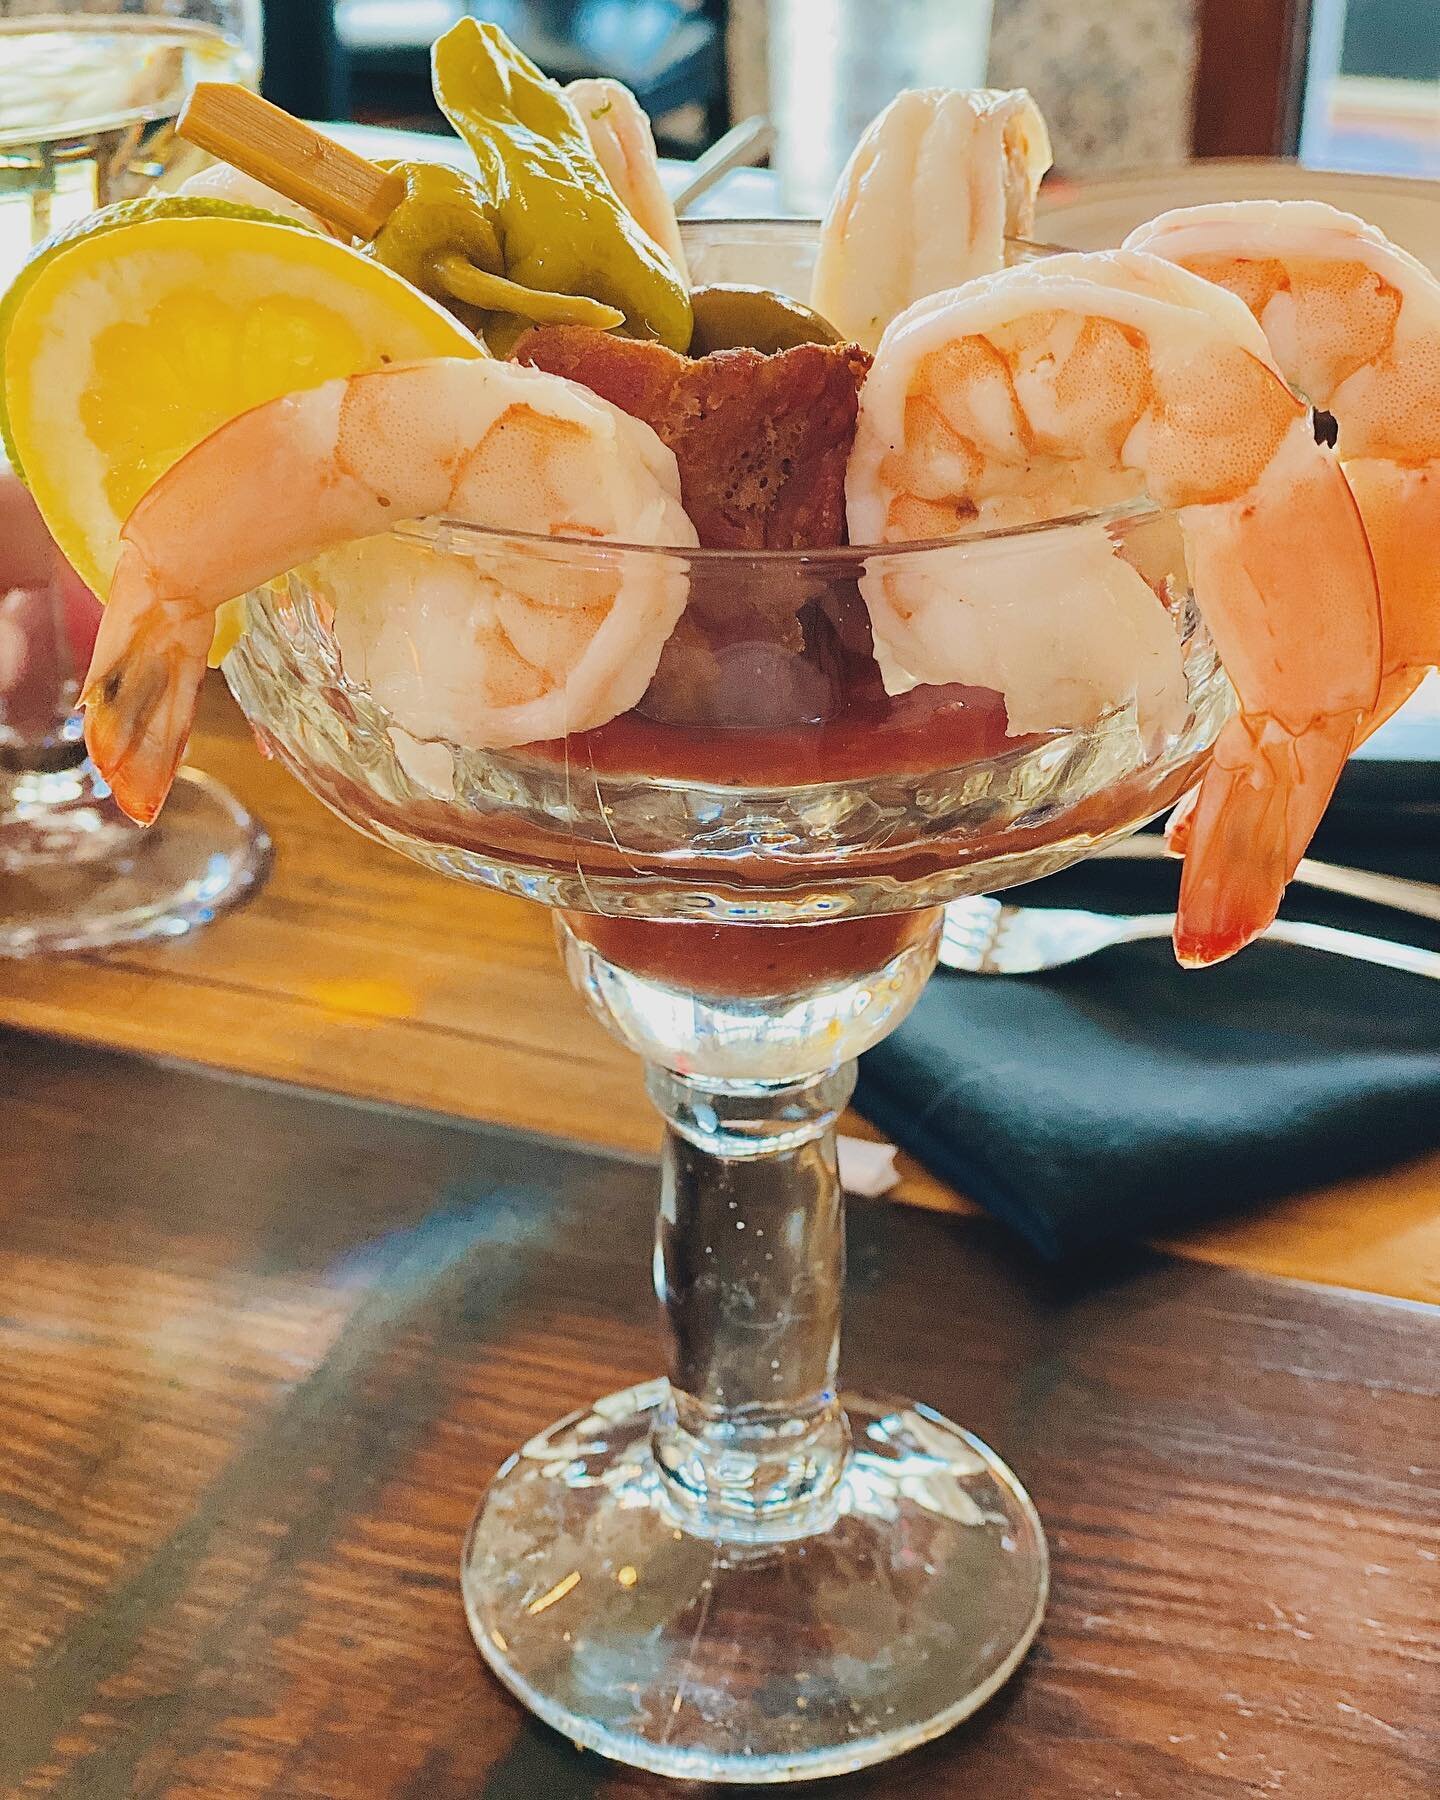 Switching it up this #CocktailTuesday by featuring our shrimp cocktail! 🍤😋

Add this appetizer to your meal and enjoy grilled prawns served with our house made Bloody Mary cocktail sauce, pickled vegetables and crisp bacon. 👏

Available tonight fr